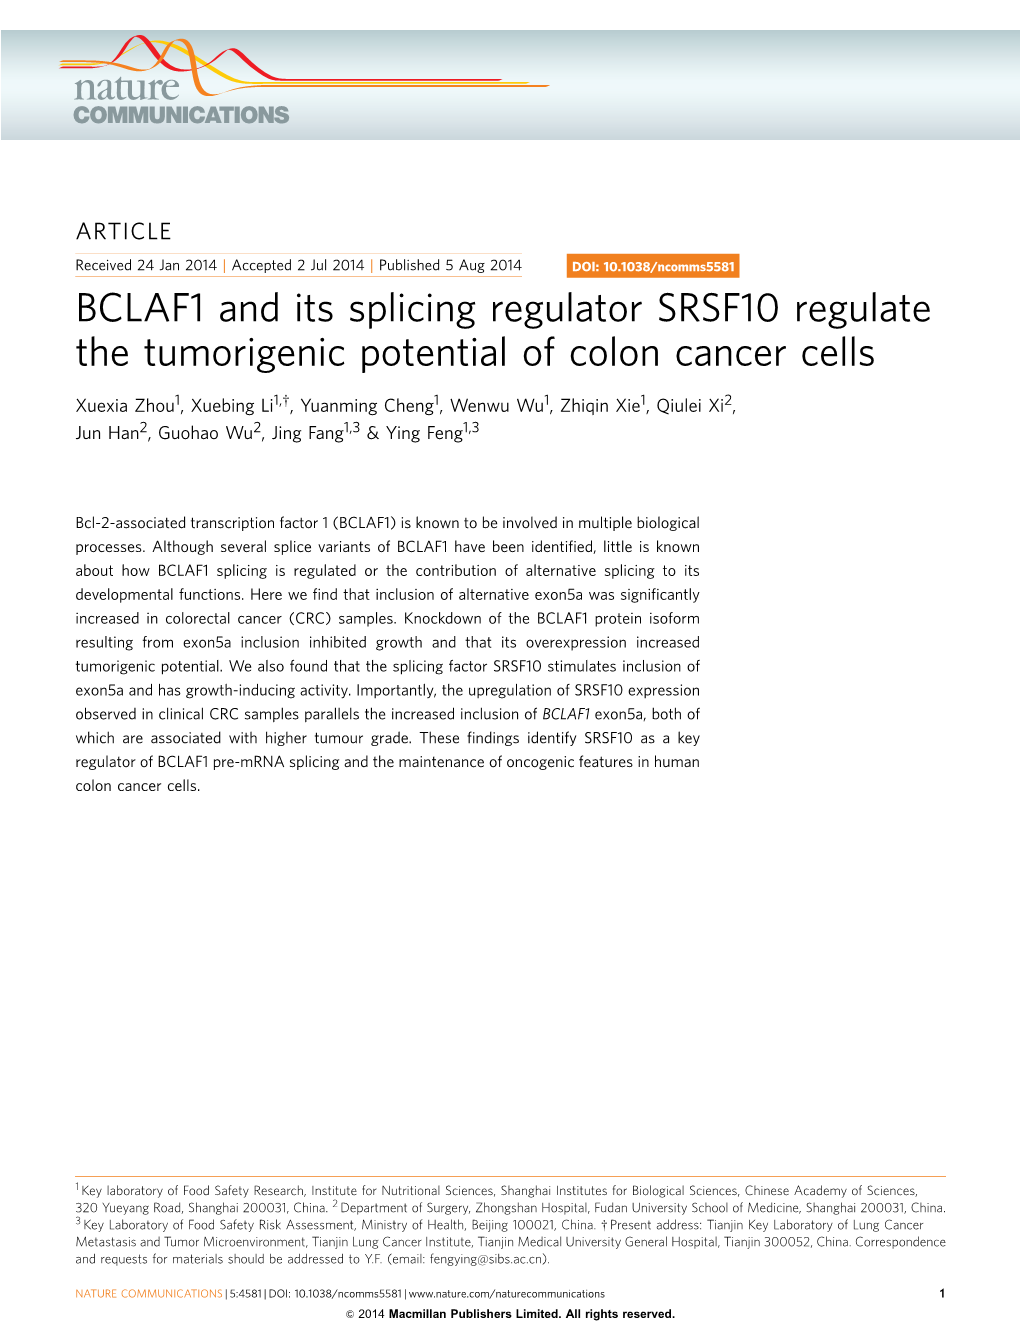 BCLAF1 and Its Splicing Regulator SRSF10 Regulate the Tumorigenic Potential of Colon Cancer Cells